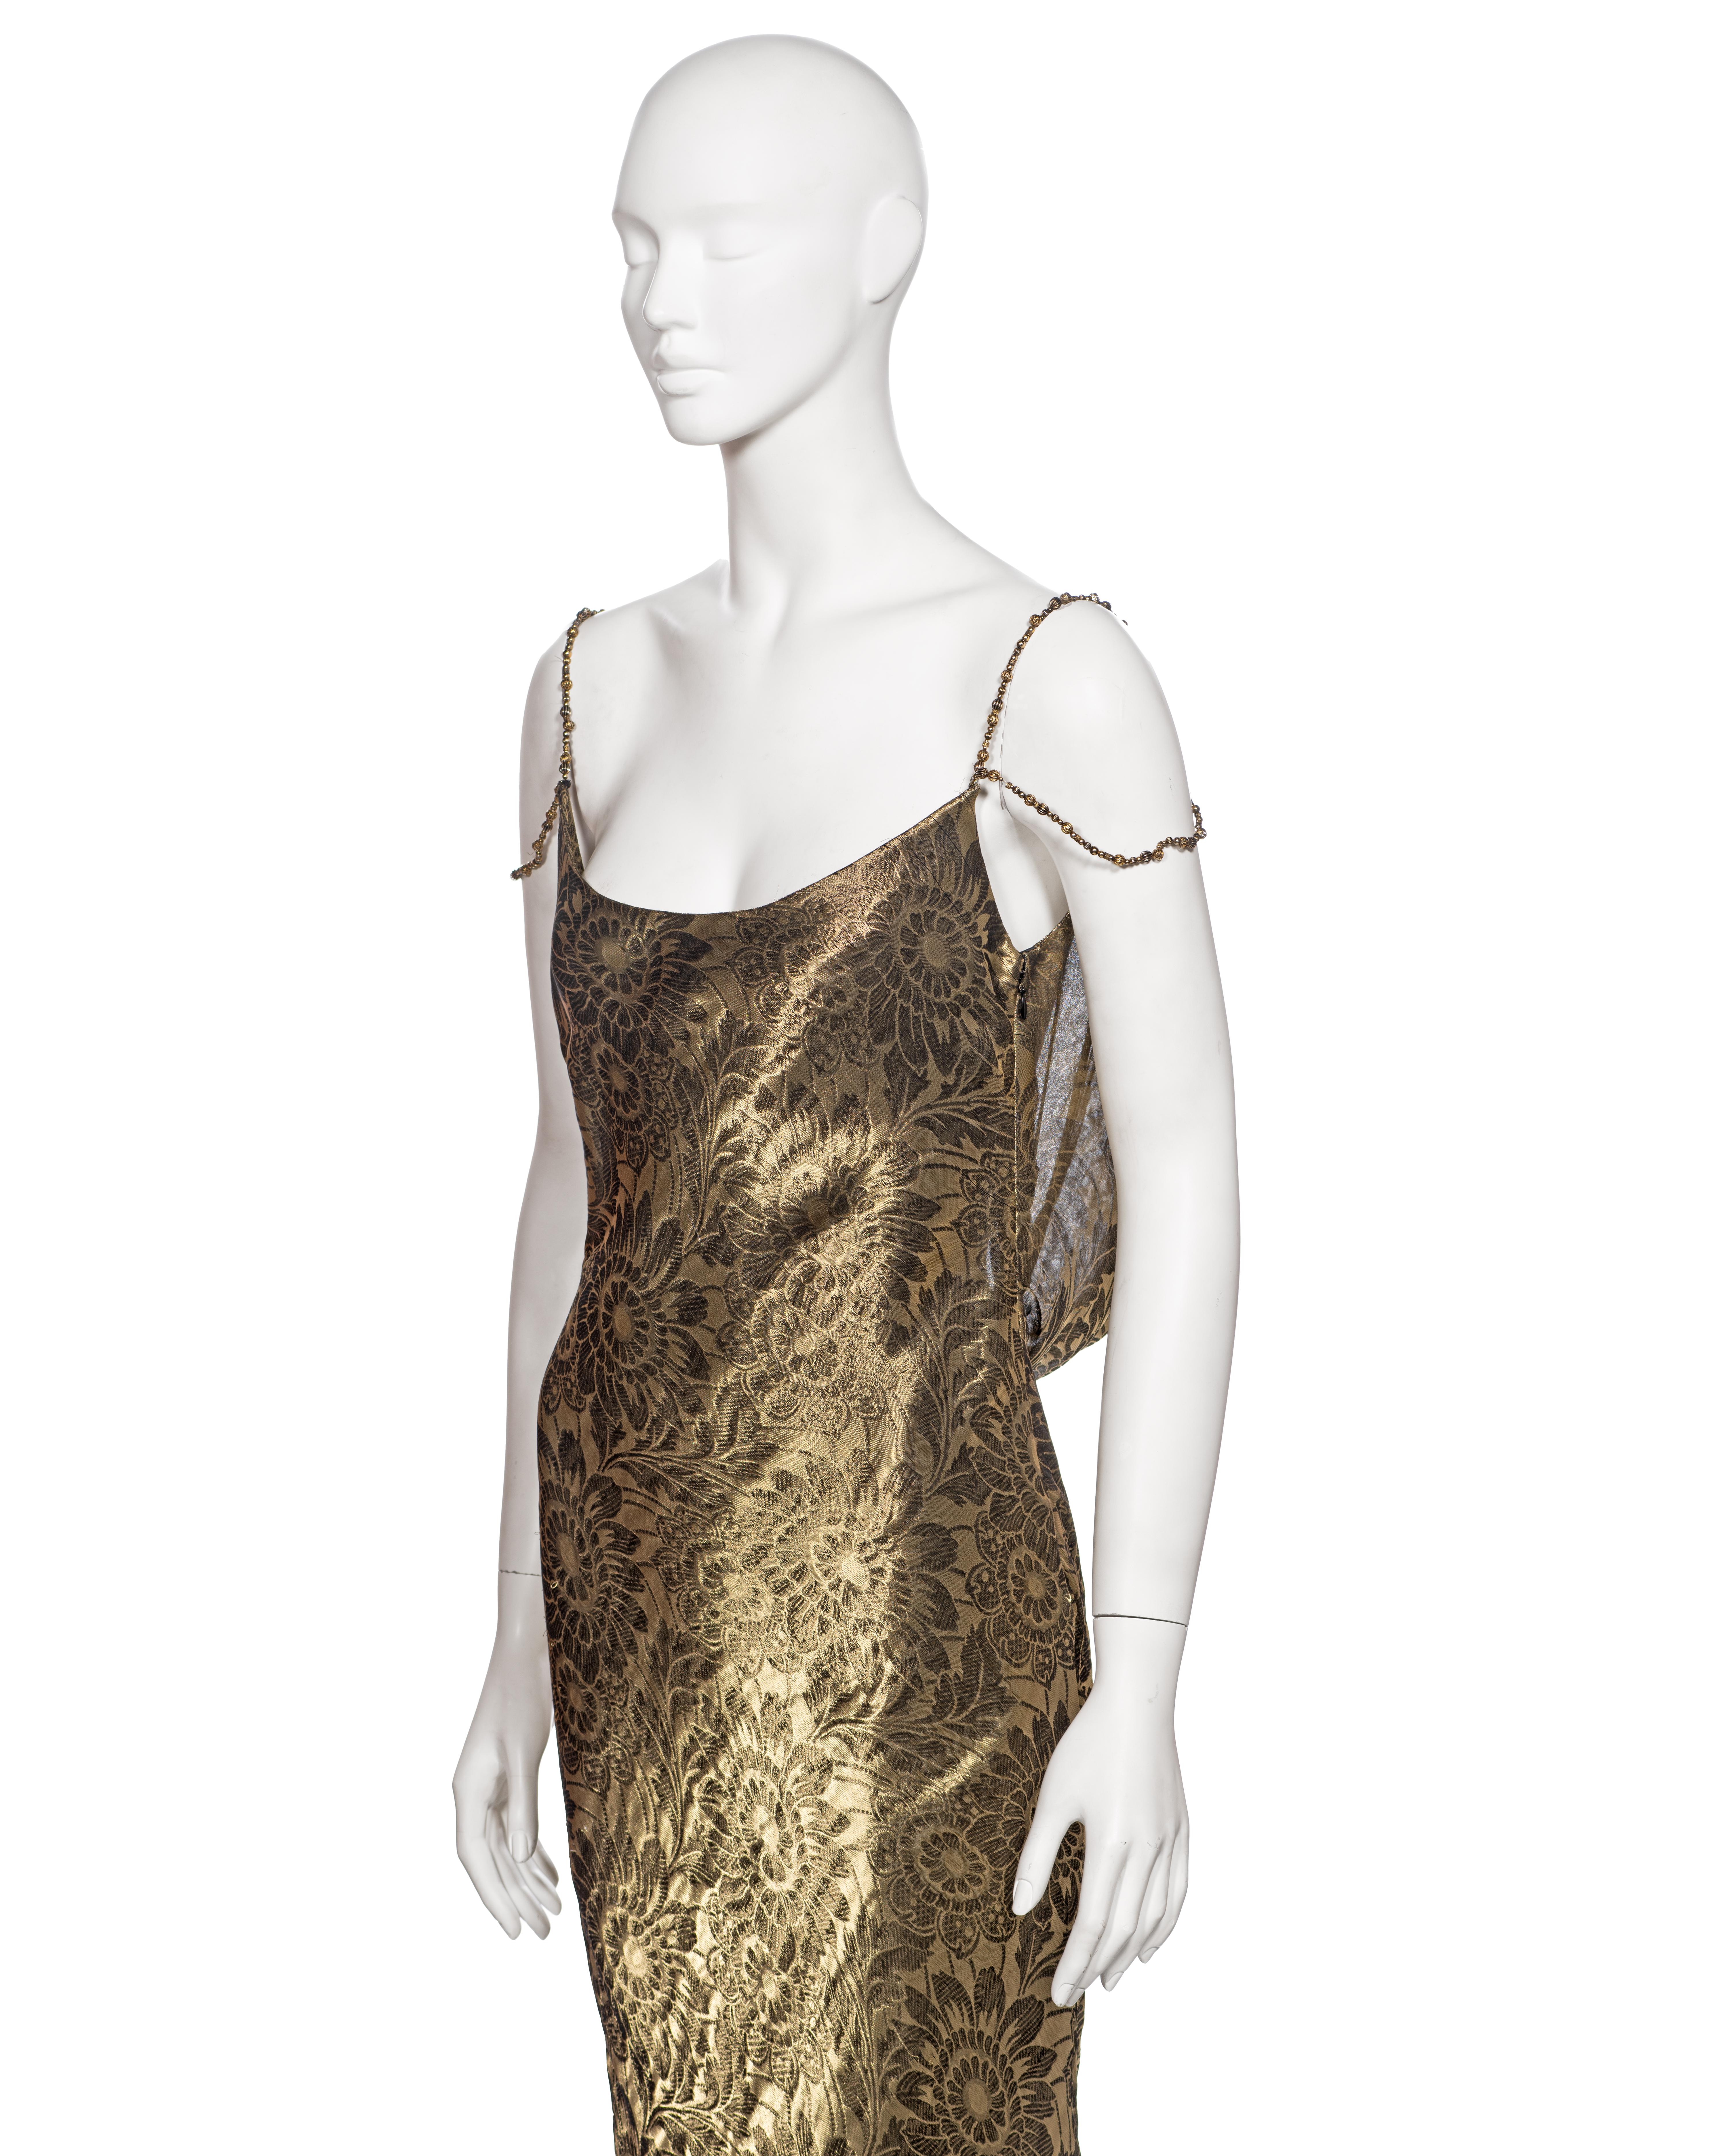 Christian Dior by John Galliano Metallic Antique Gold Evening Dress, FW 1998 For Sale 4